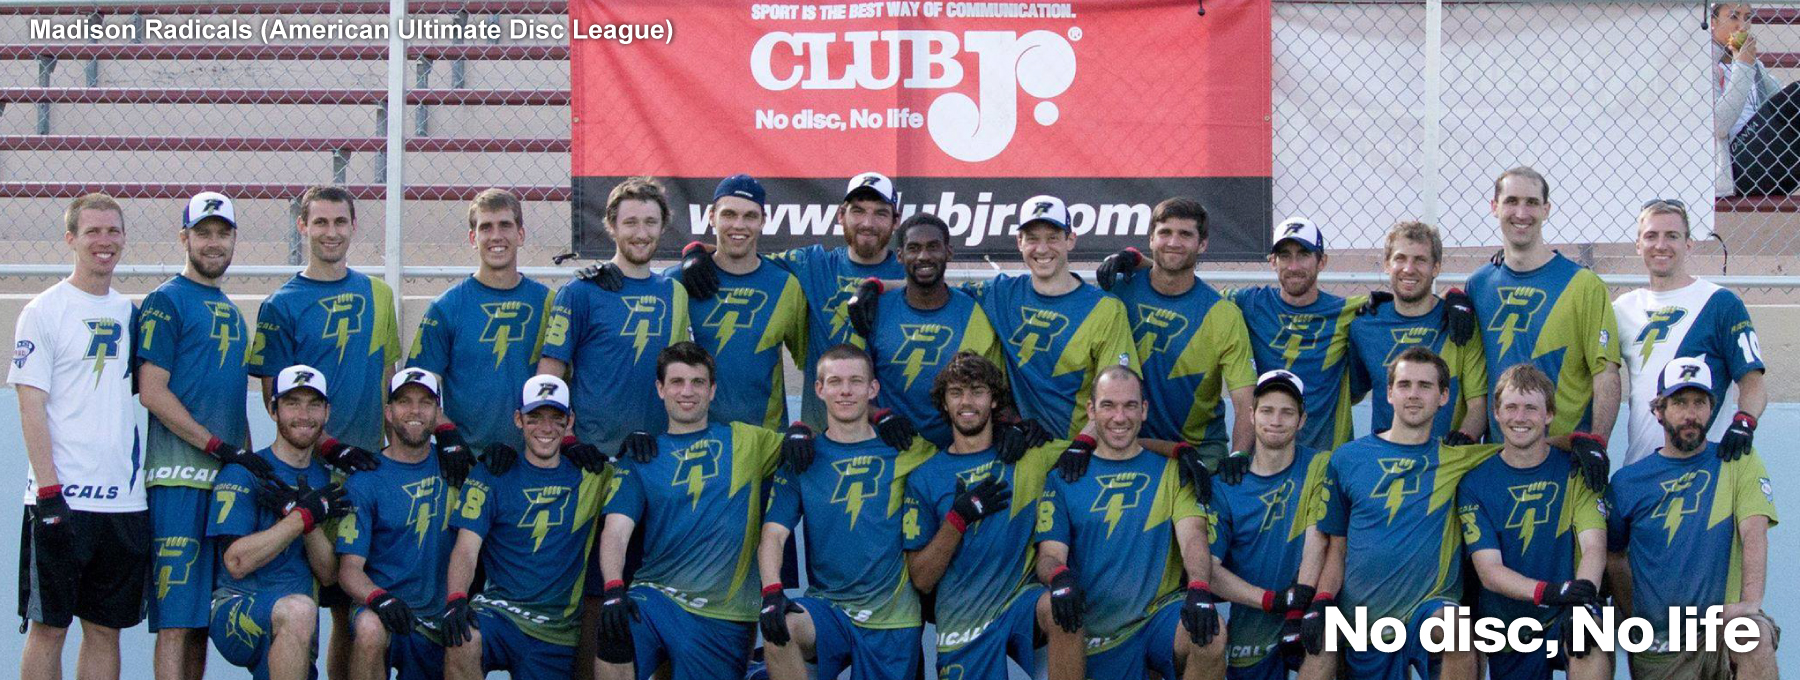 Madison Radicals (American Ultimate Disc League)